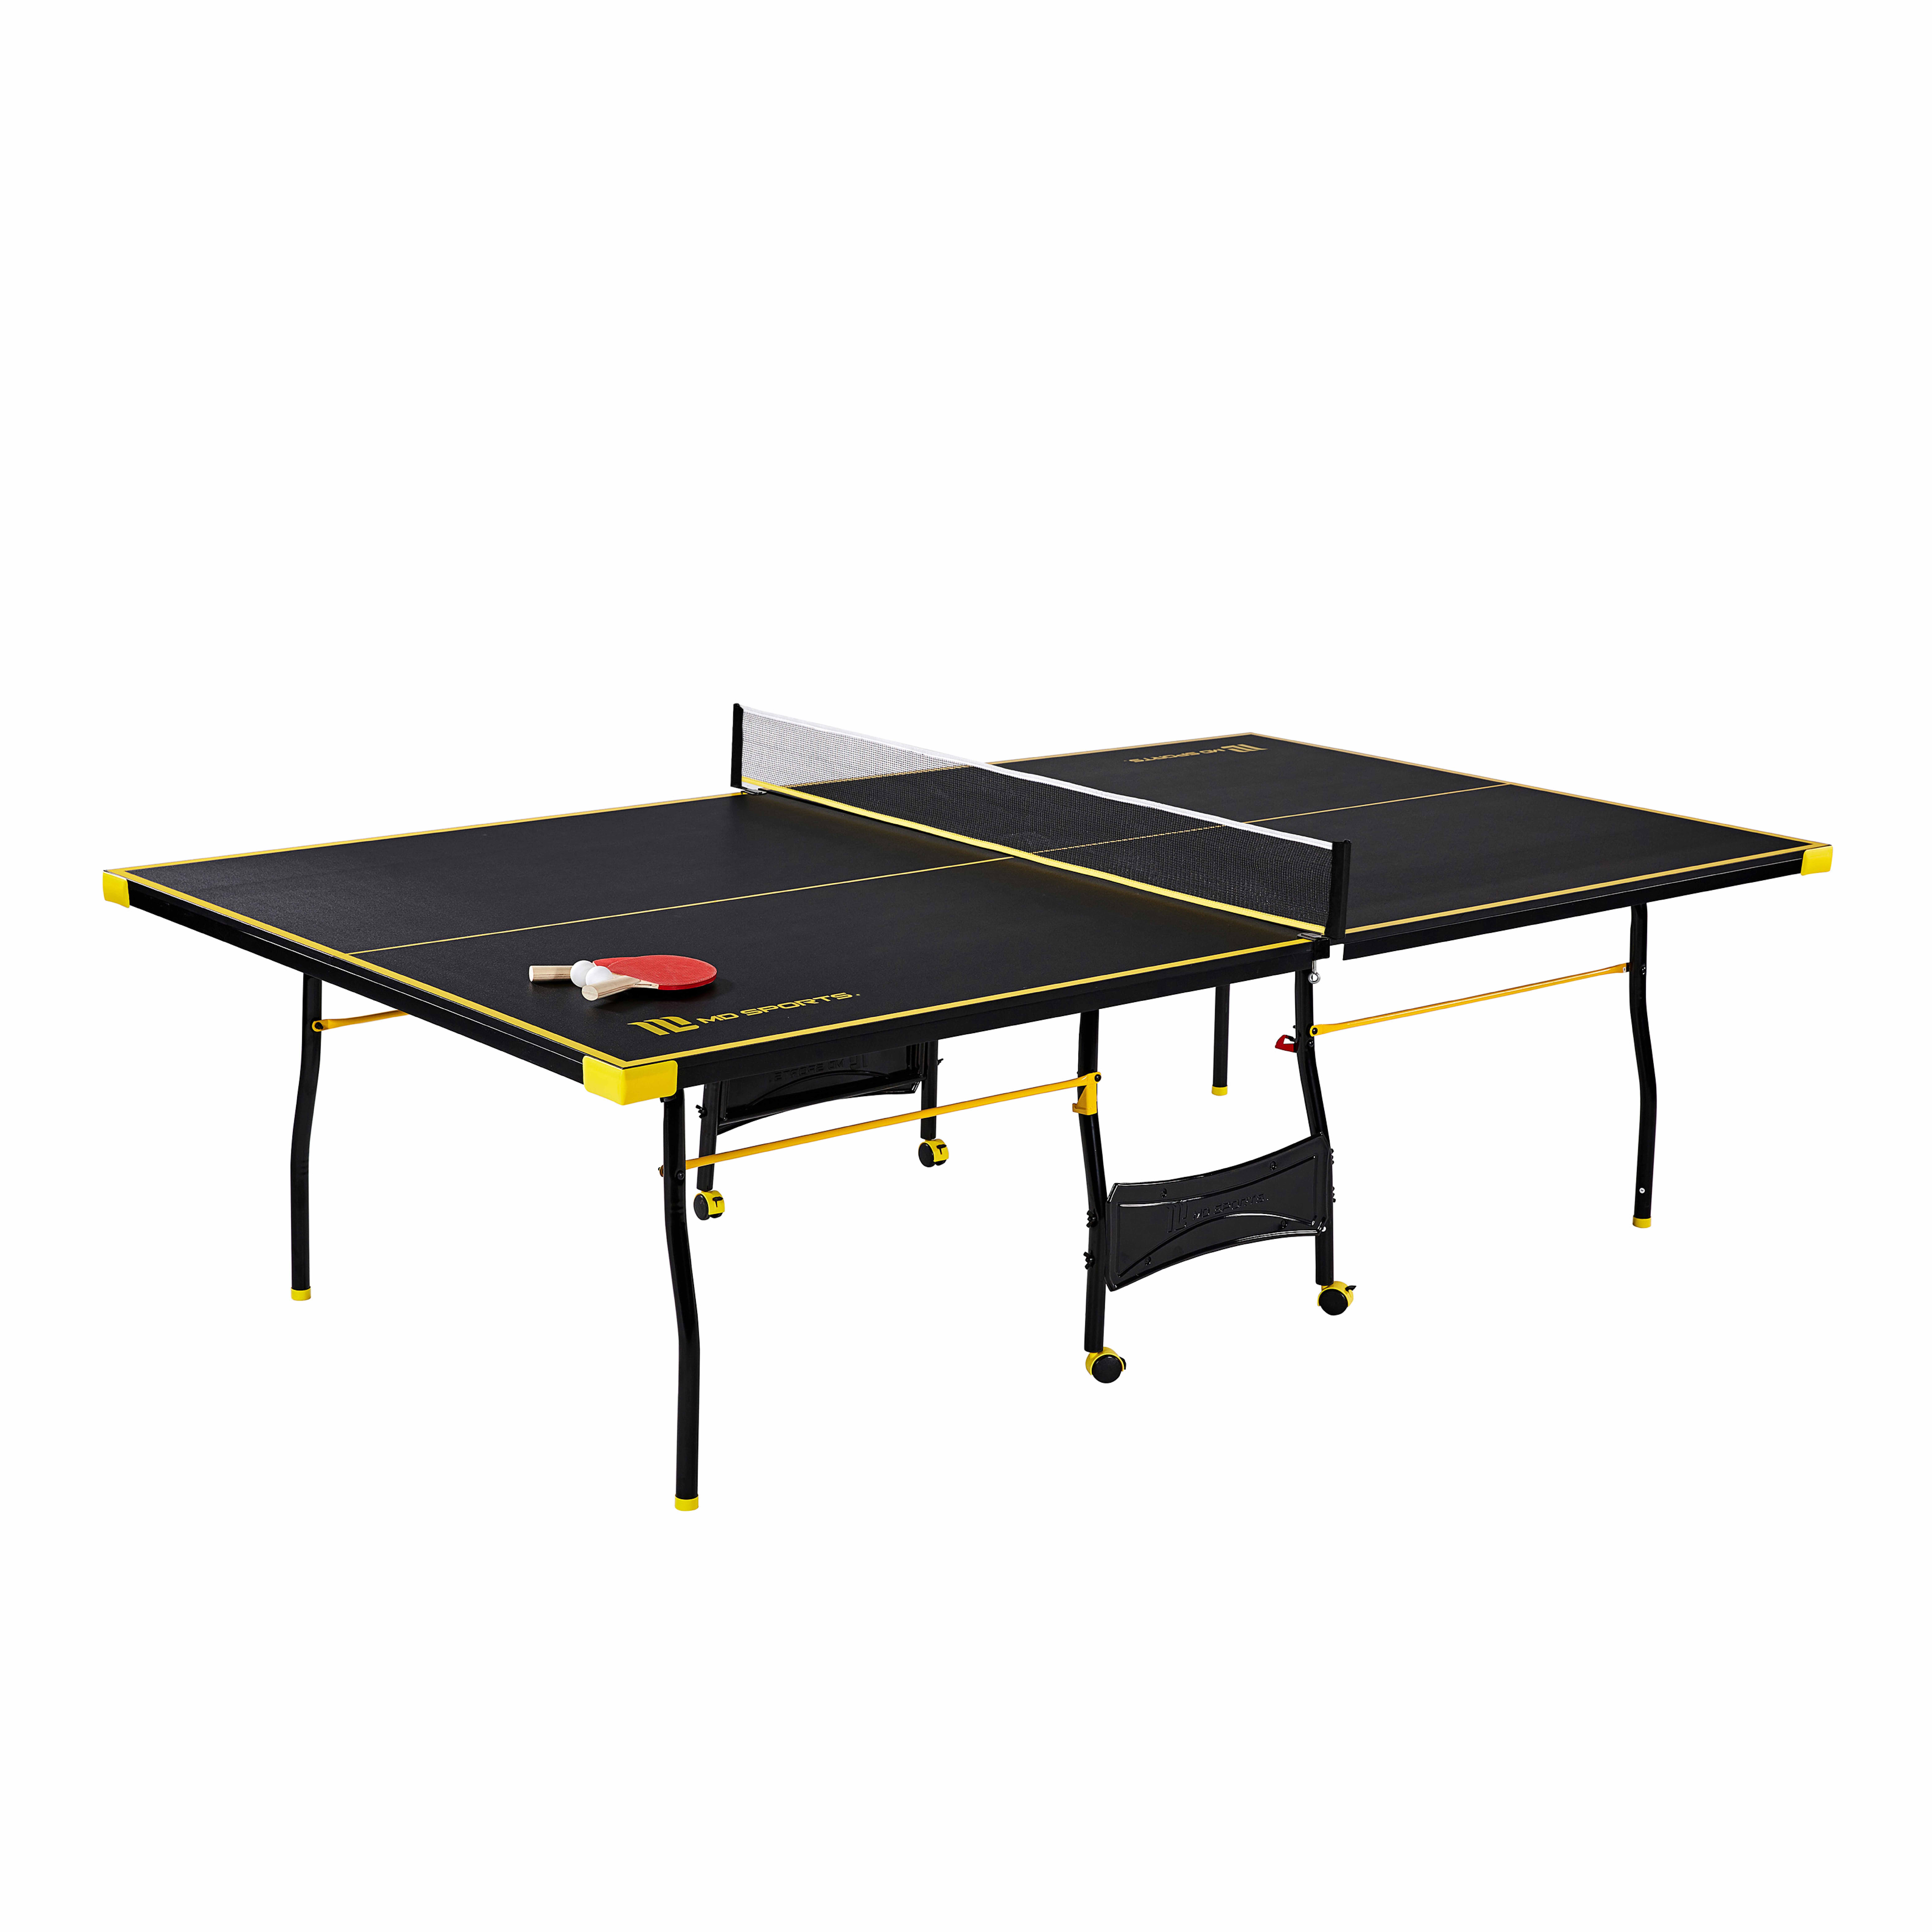 MD Sports Official Size Table Tennis Table - image 1 of 13